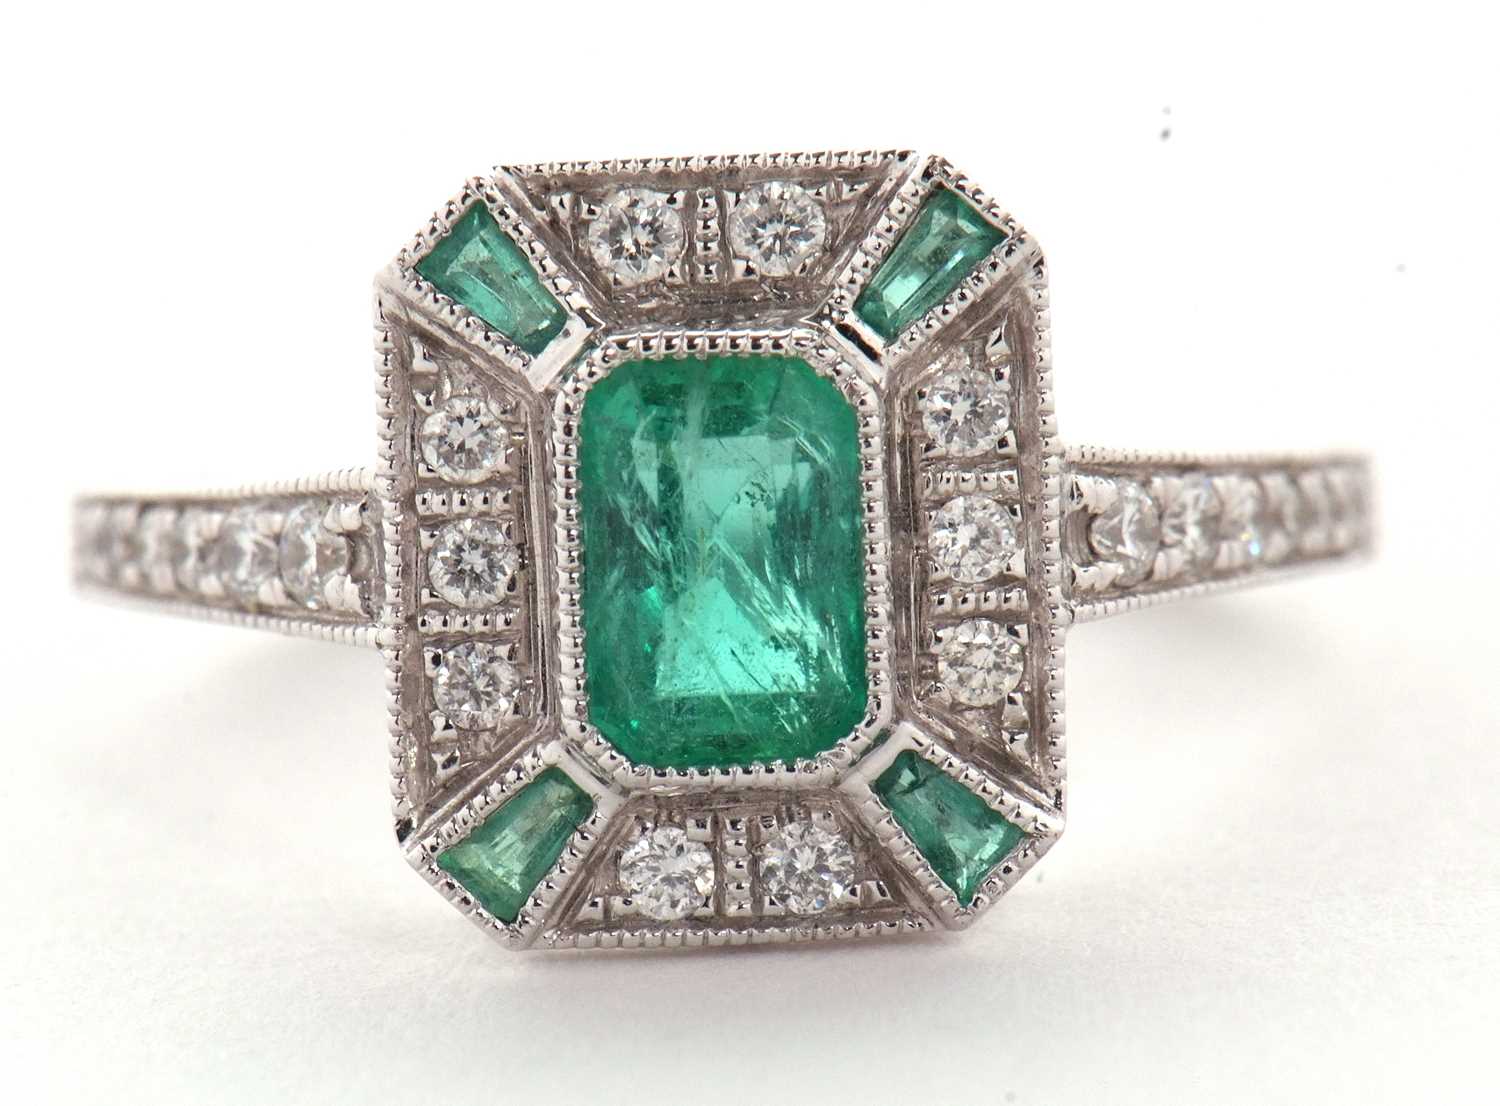 An 18ct emerald and diamond Art Deco style ring, the central emerald cut emerald surrounded by small